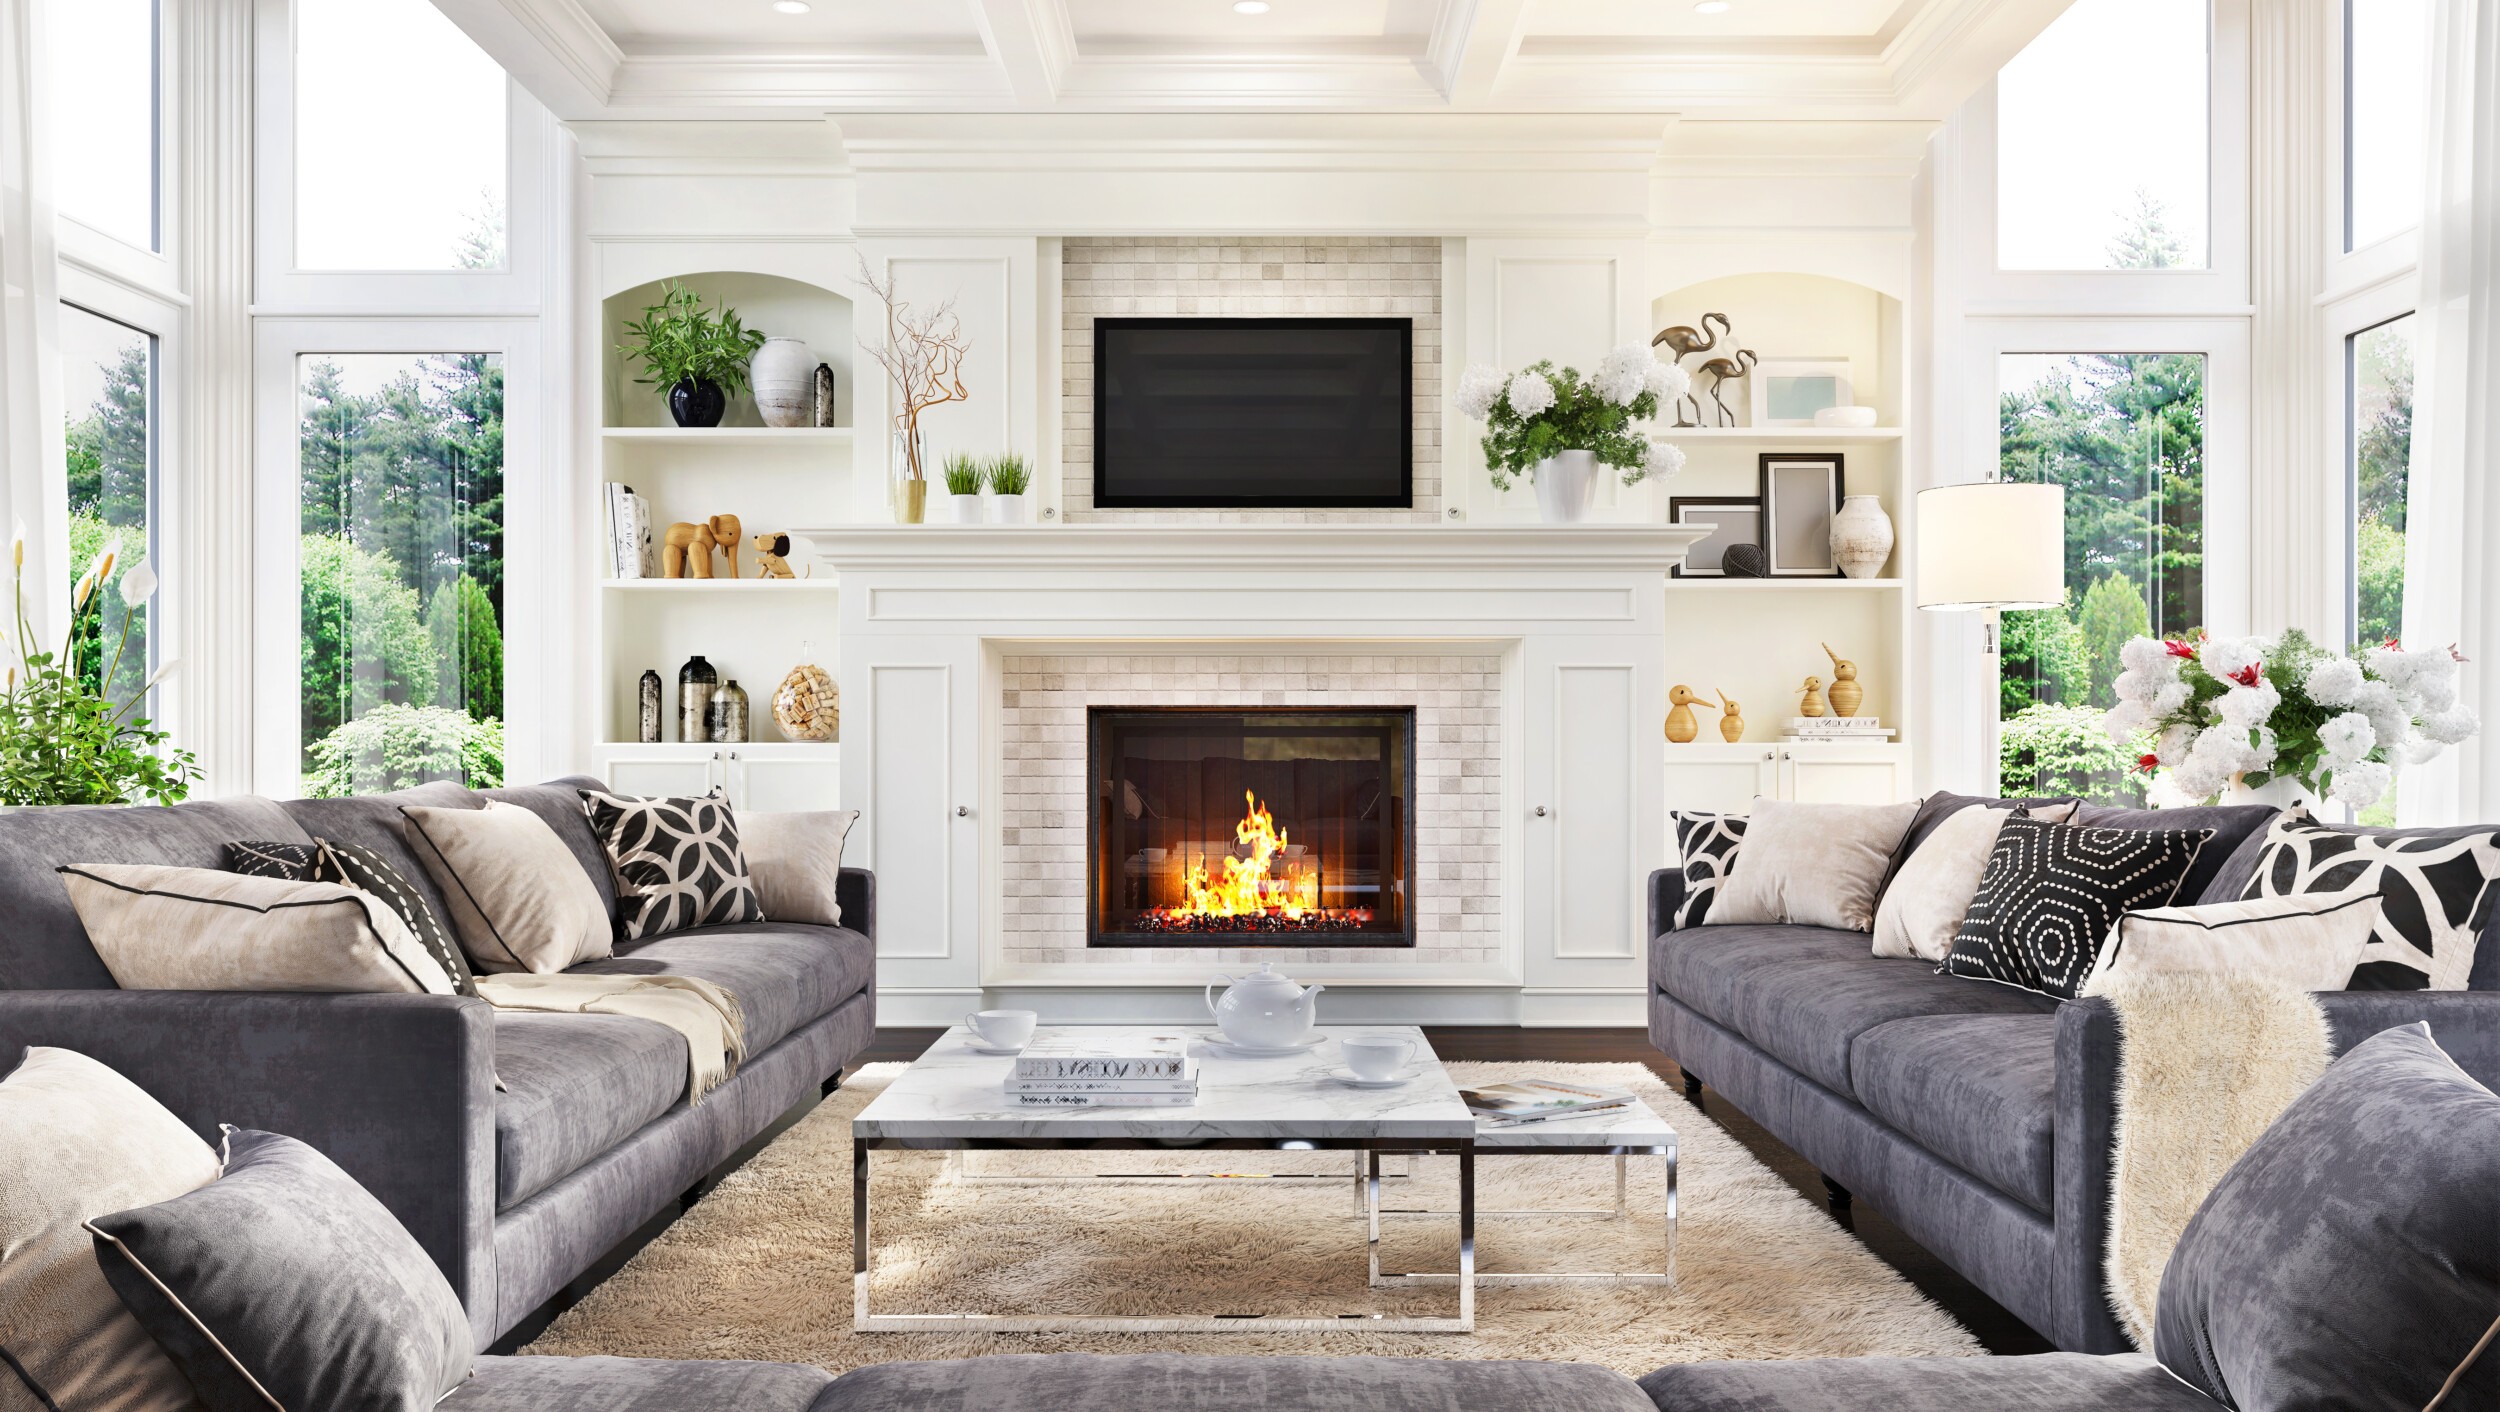 Luxurious interior design living room and fireplace